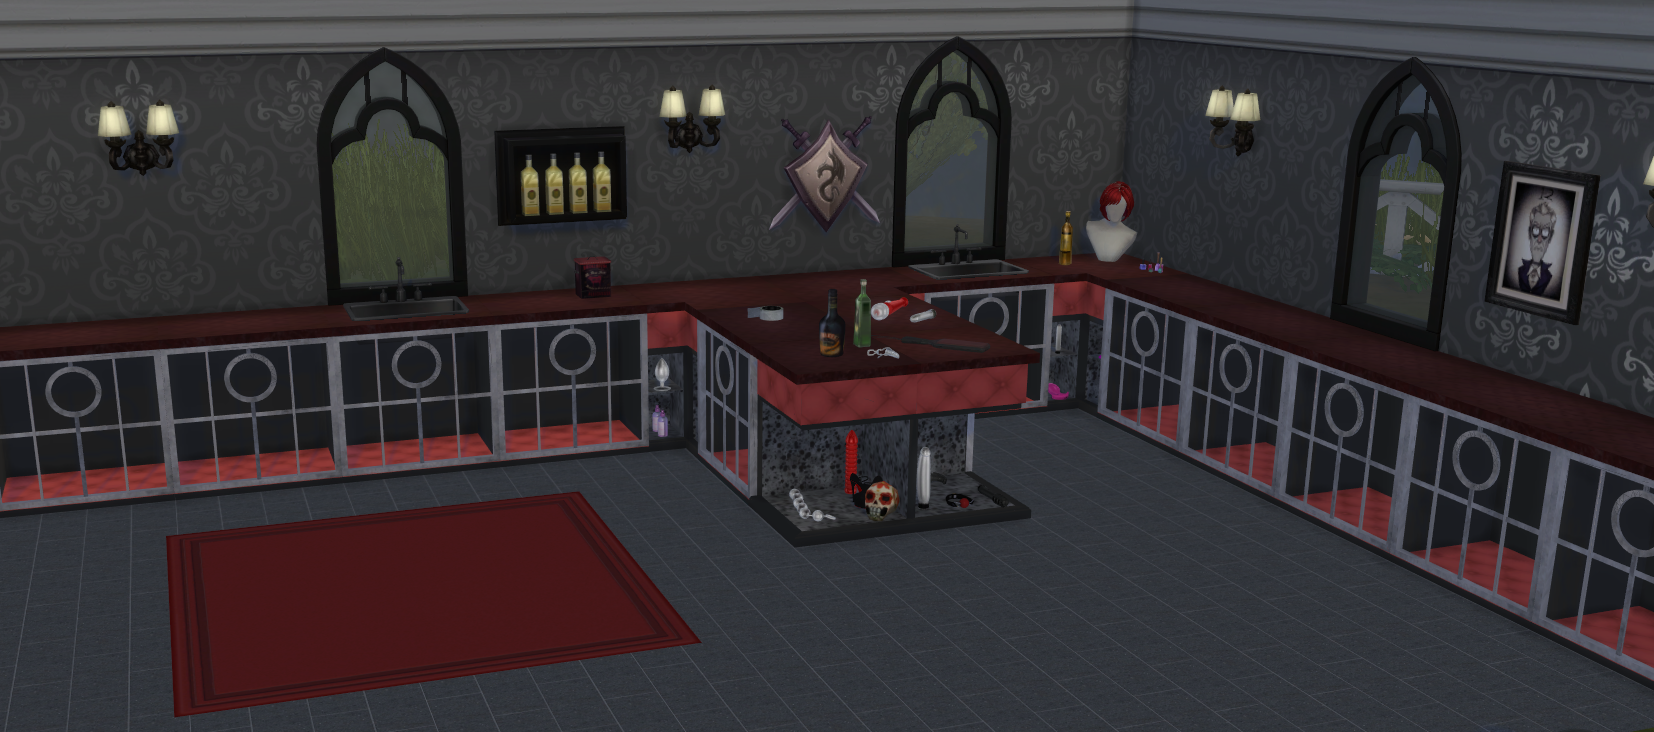 Bdsm Furniture By Bobahloo Downloads The Sims 4 Loverslab